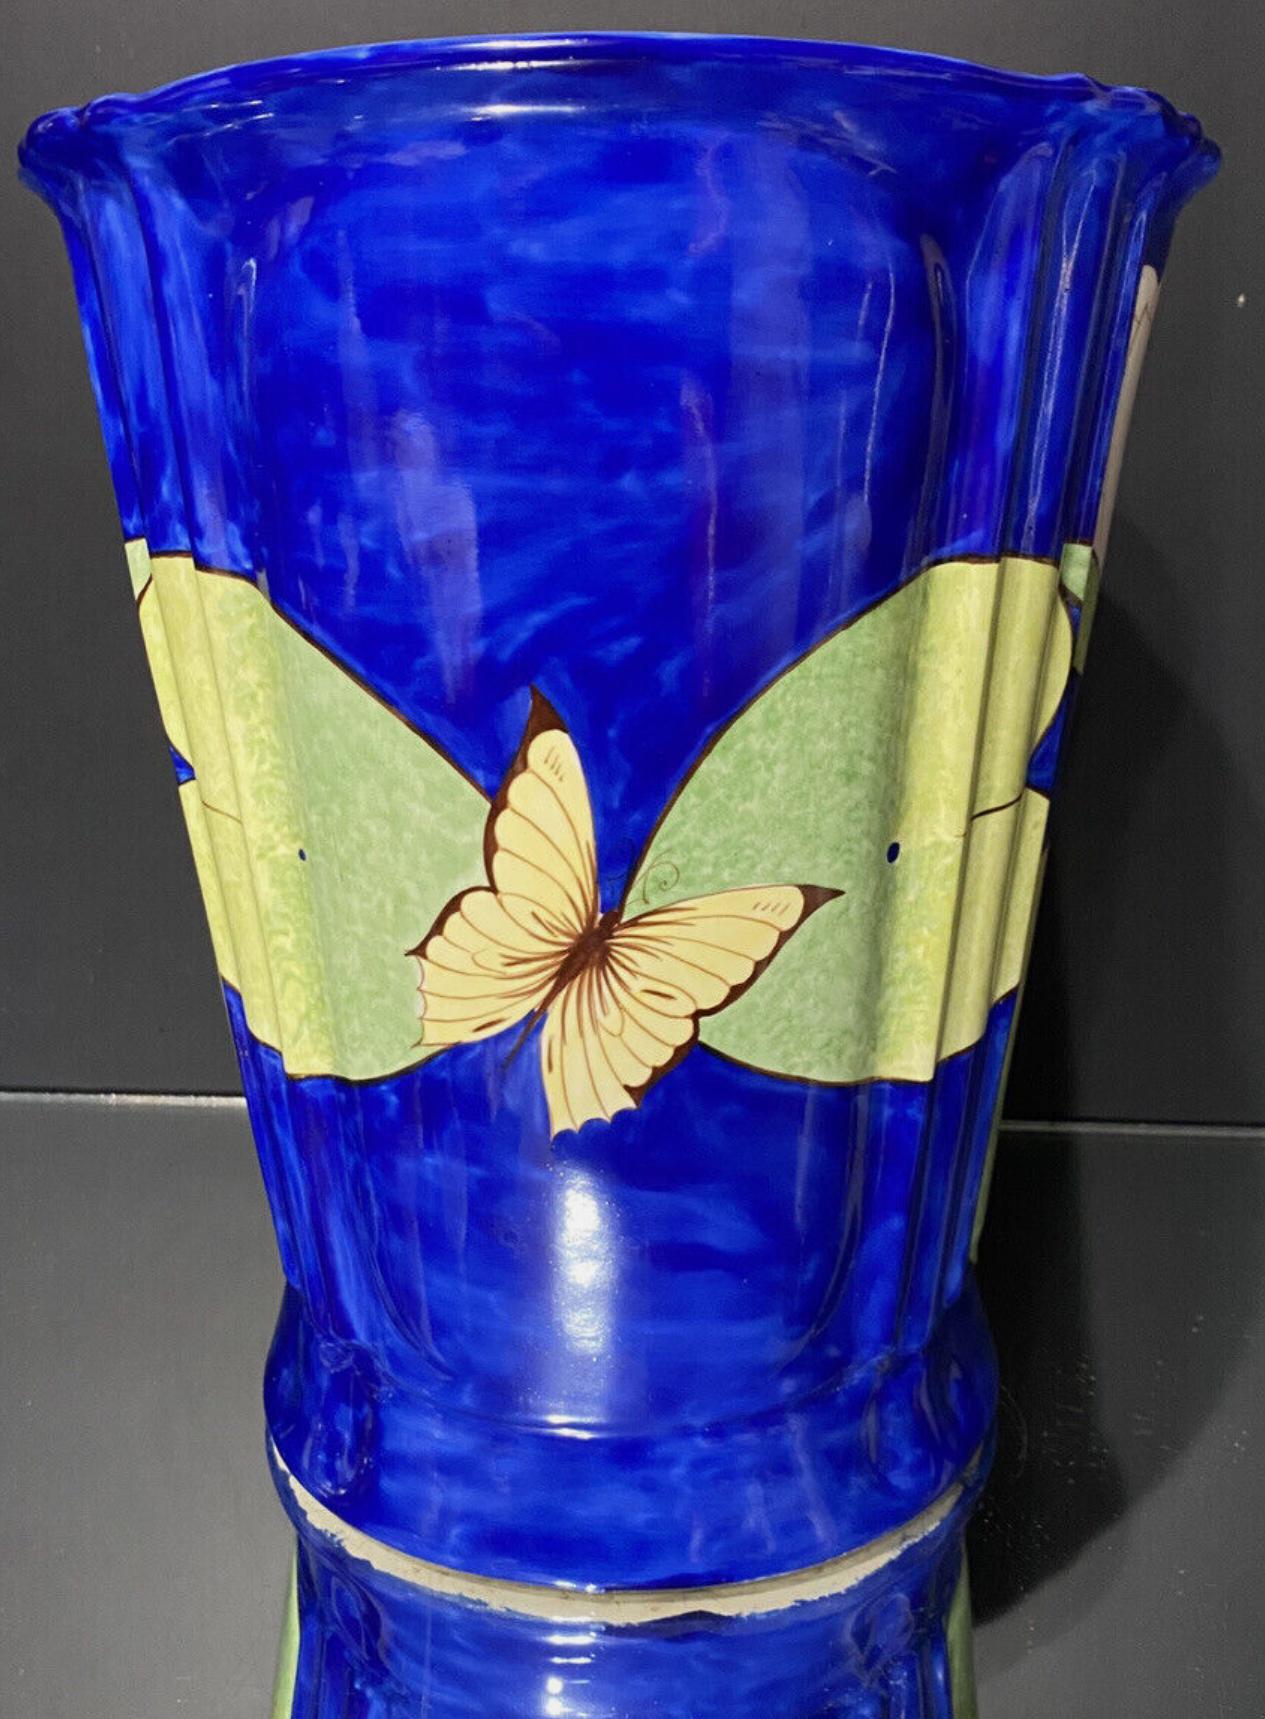 Italian Sherle Wagner Pink Waterlilly Wastebasket with Butterfly, Italy, 1960s.